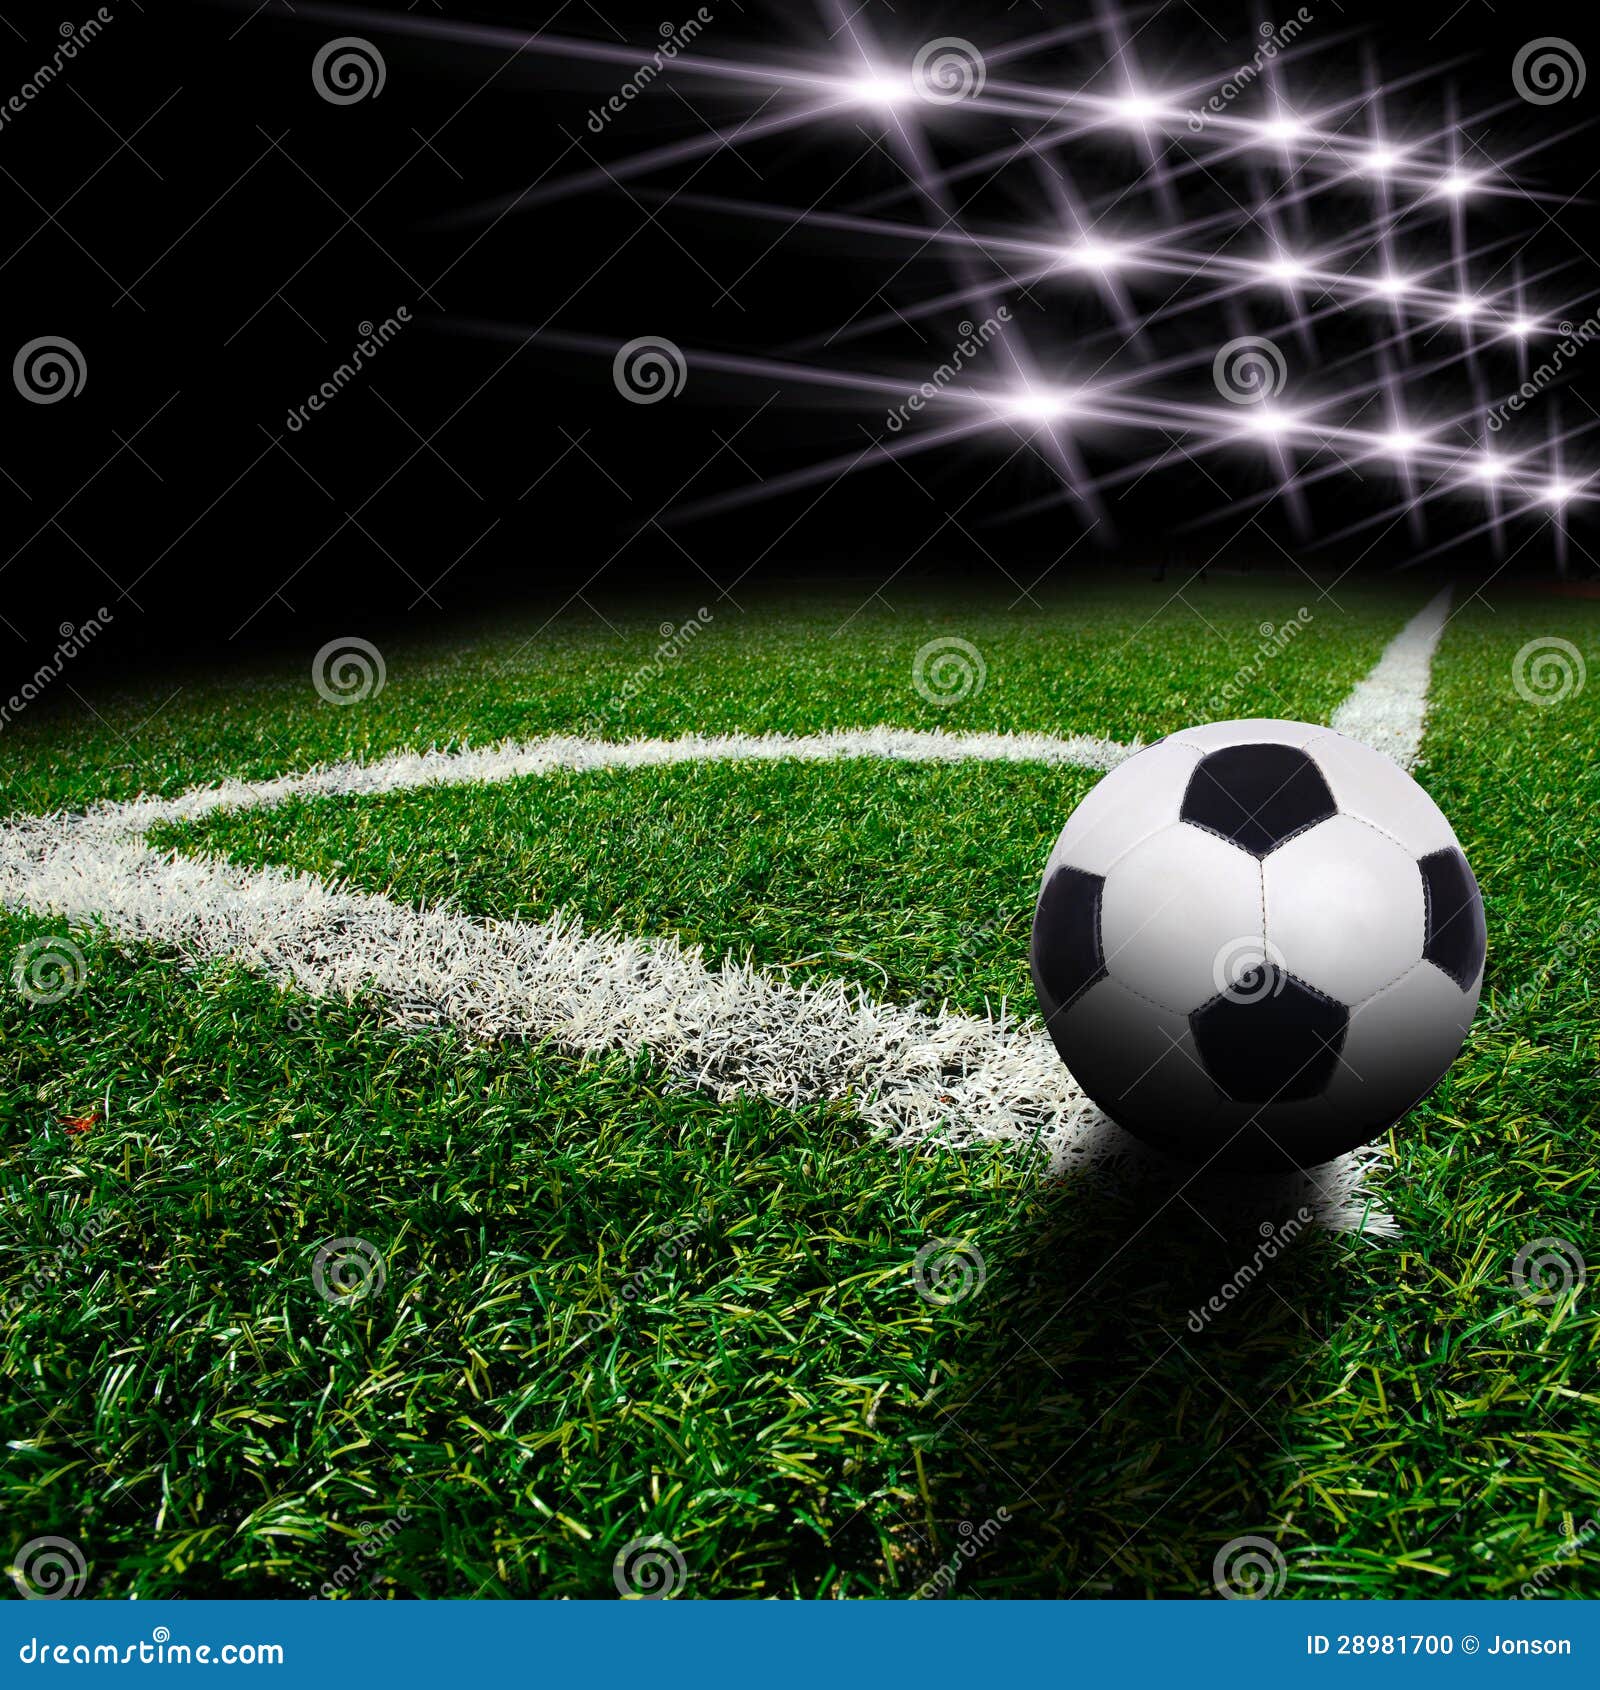 Soccer ball on the field stock photo. Image of meadow - 28981700